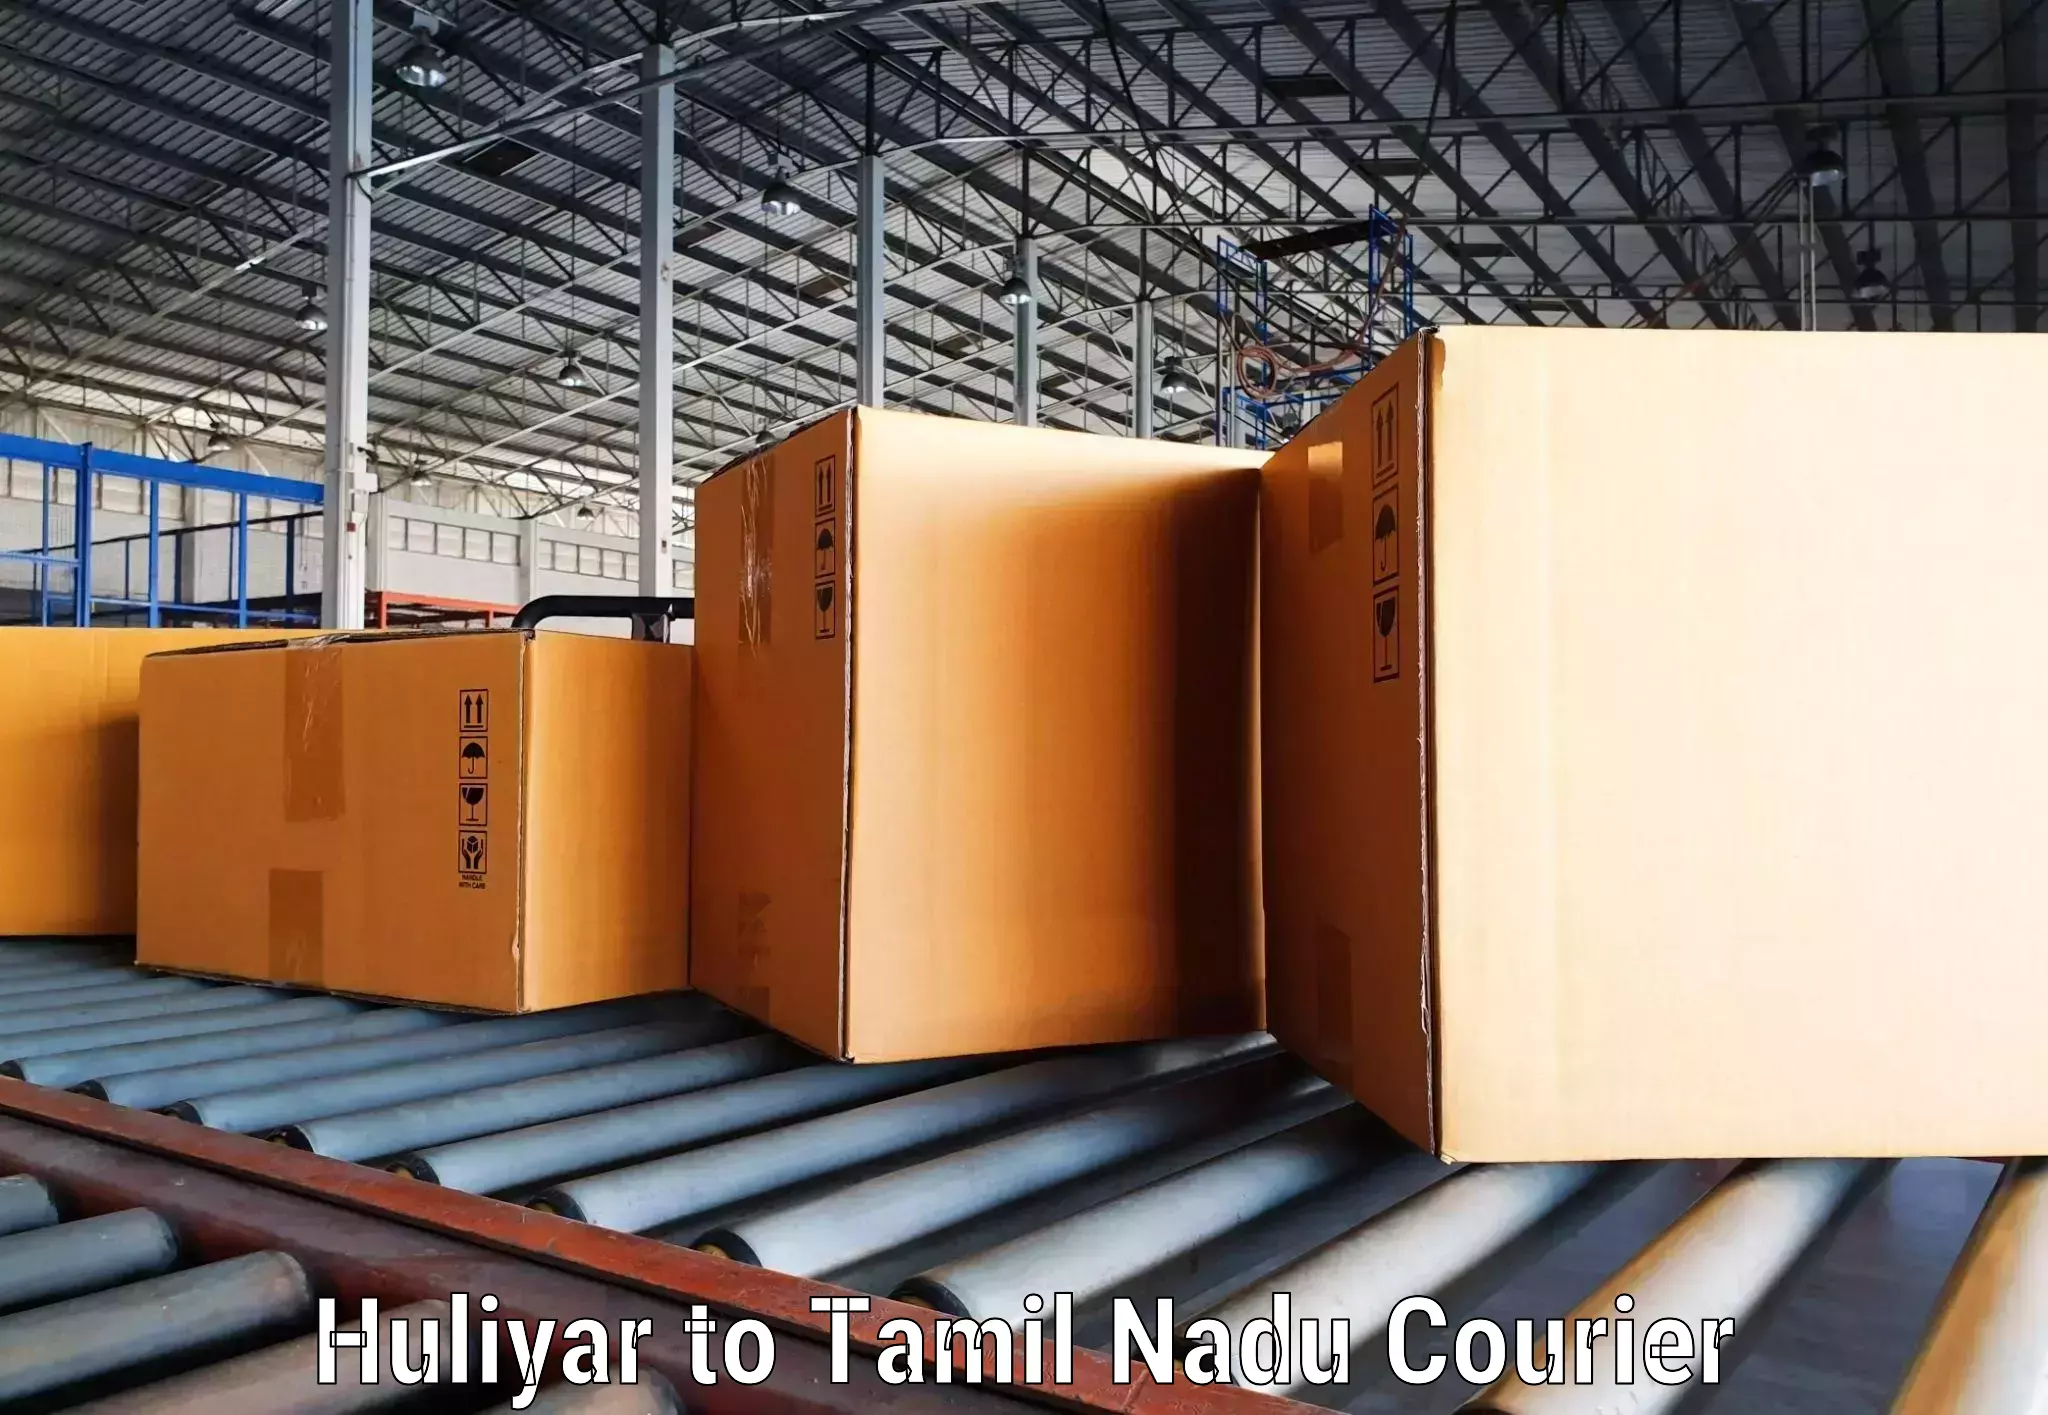 State-of-the-art courier technology Huliyar to Vellore